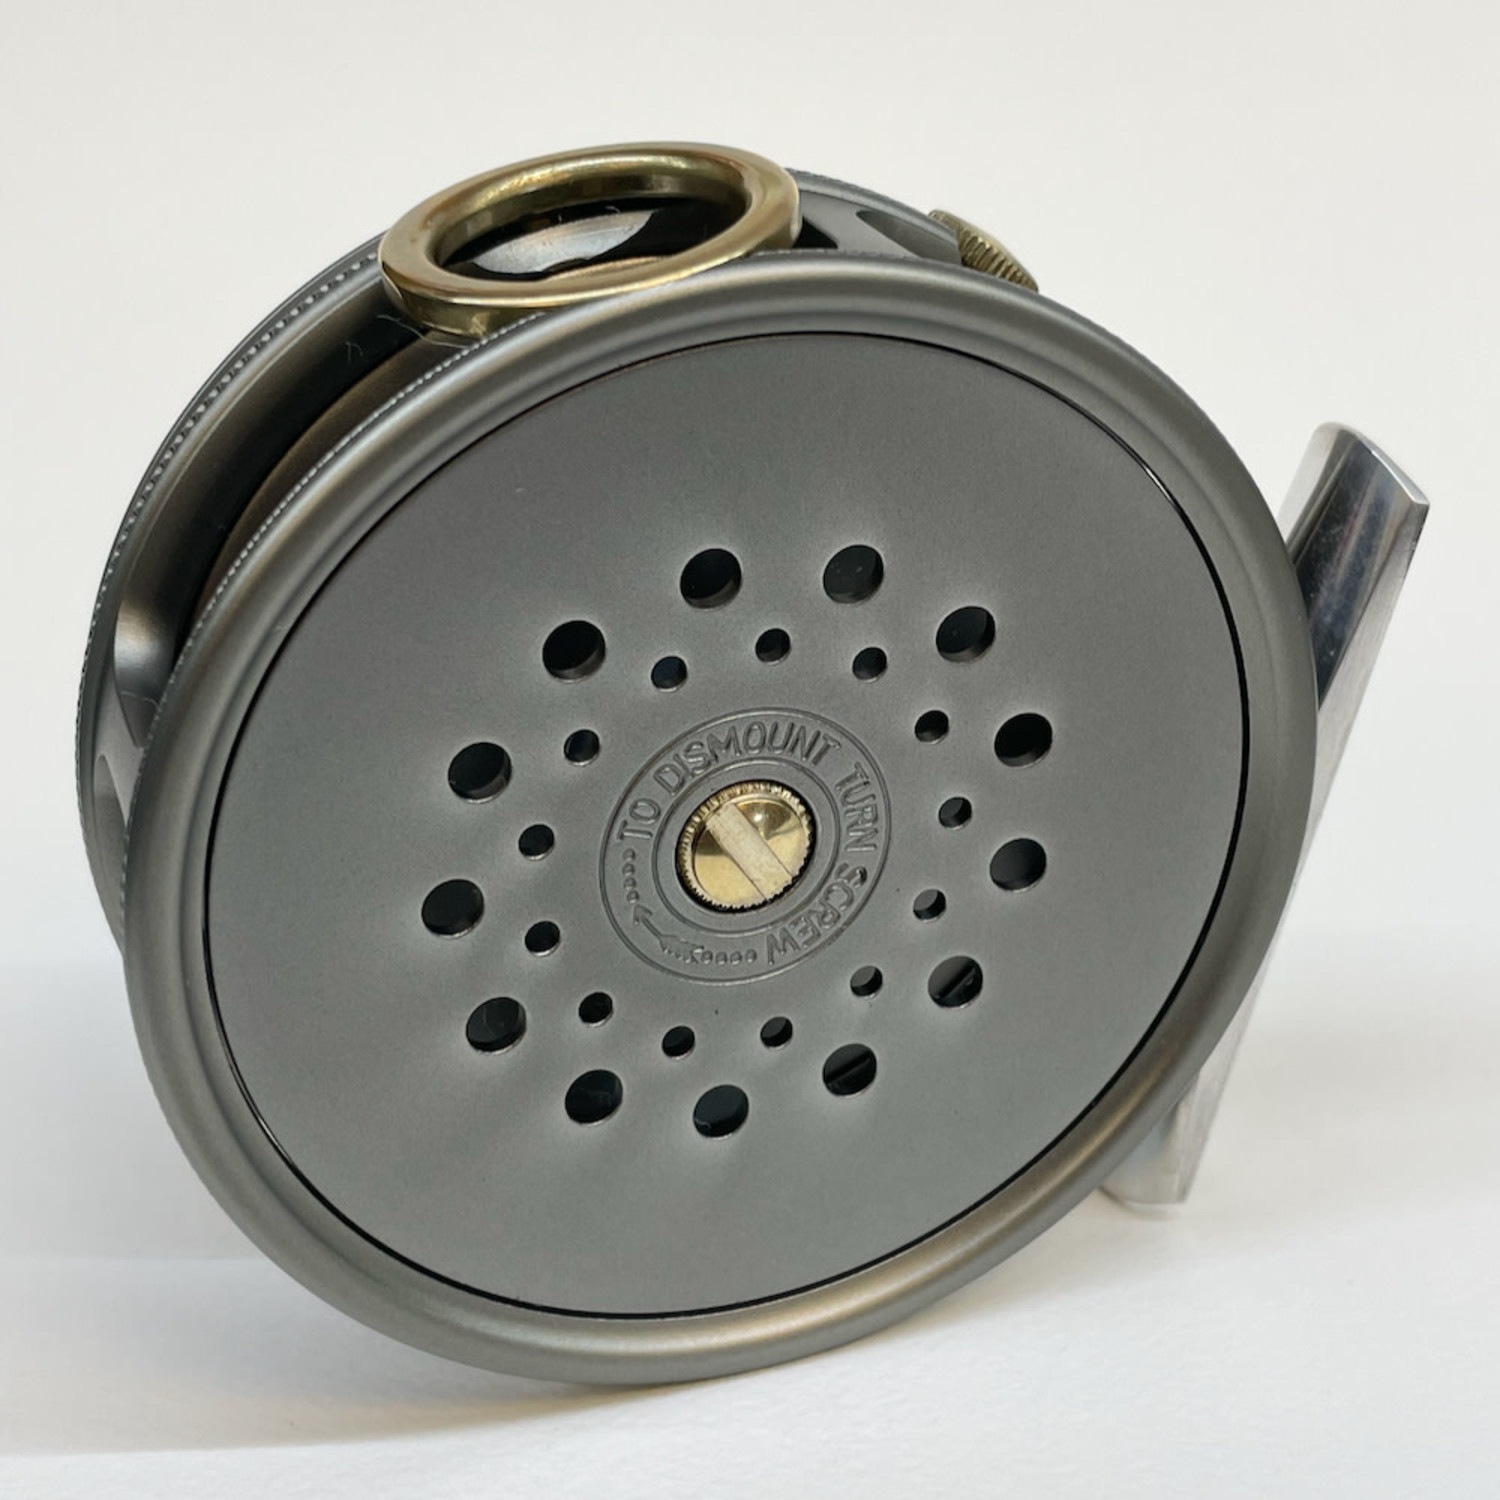 HARDY PERFECT FLY Reel Narrow 2 7/8in Right Hand Retrieve $399.99 - PicClick